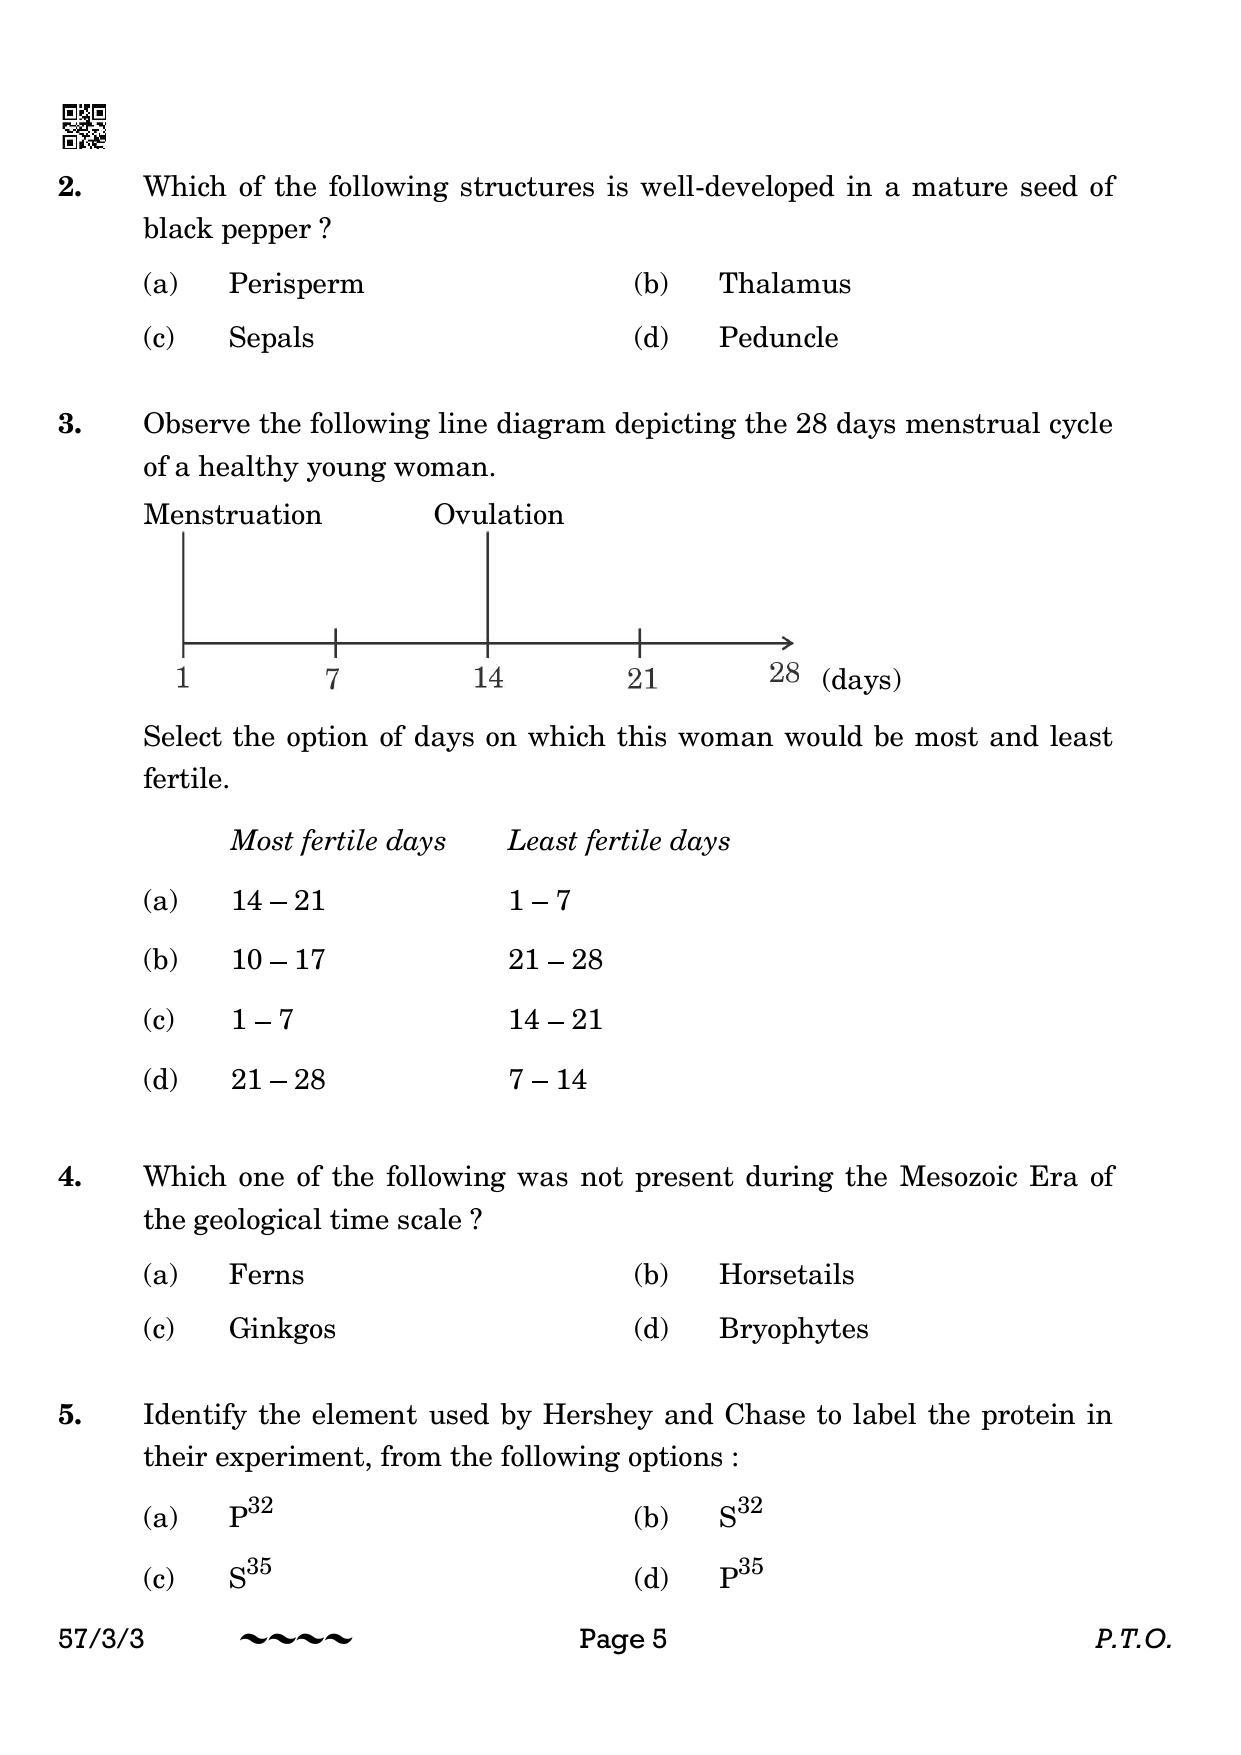 CBSE Class 12 57-3-3 Biology 2023 Question Paper - Page 5